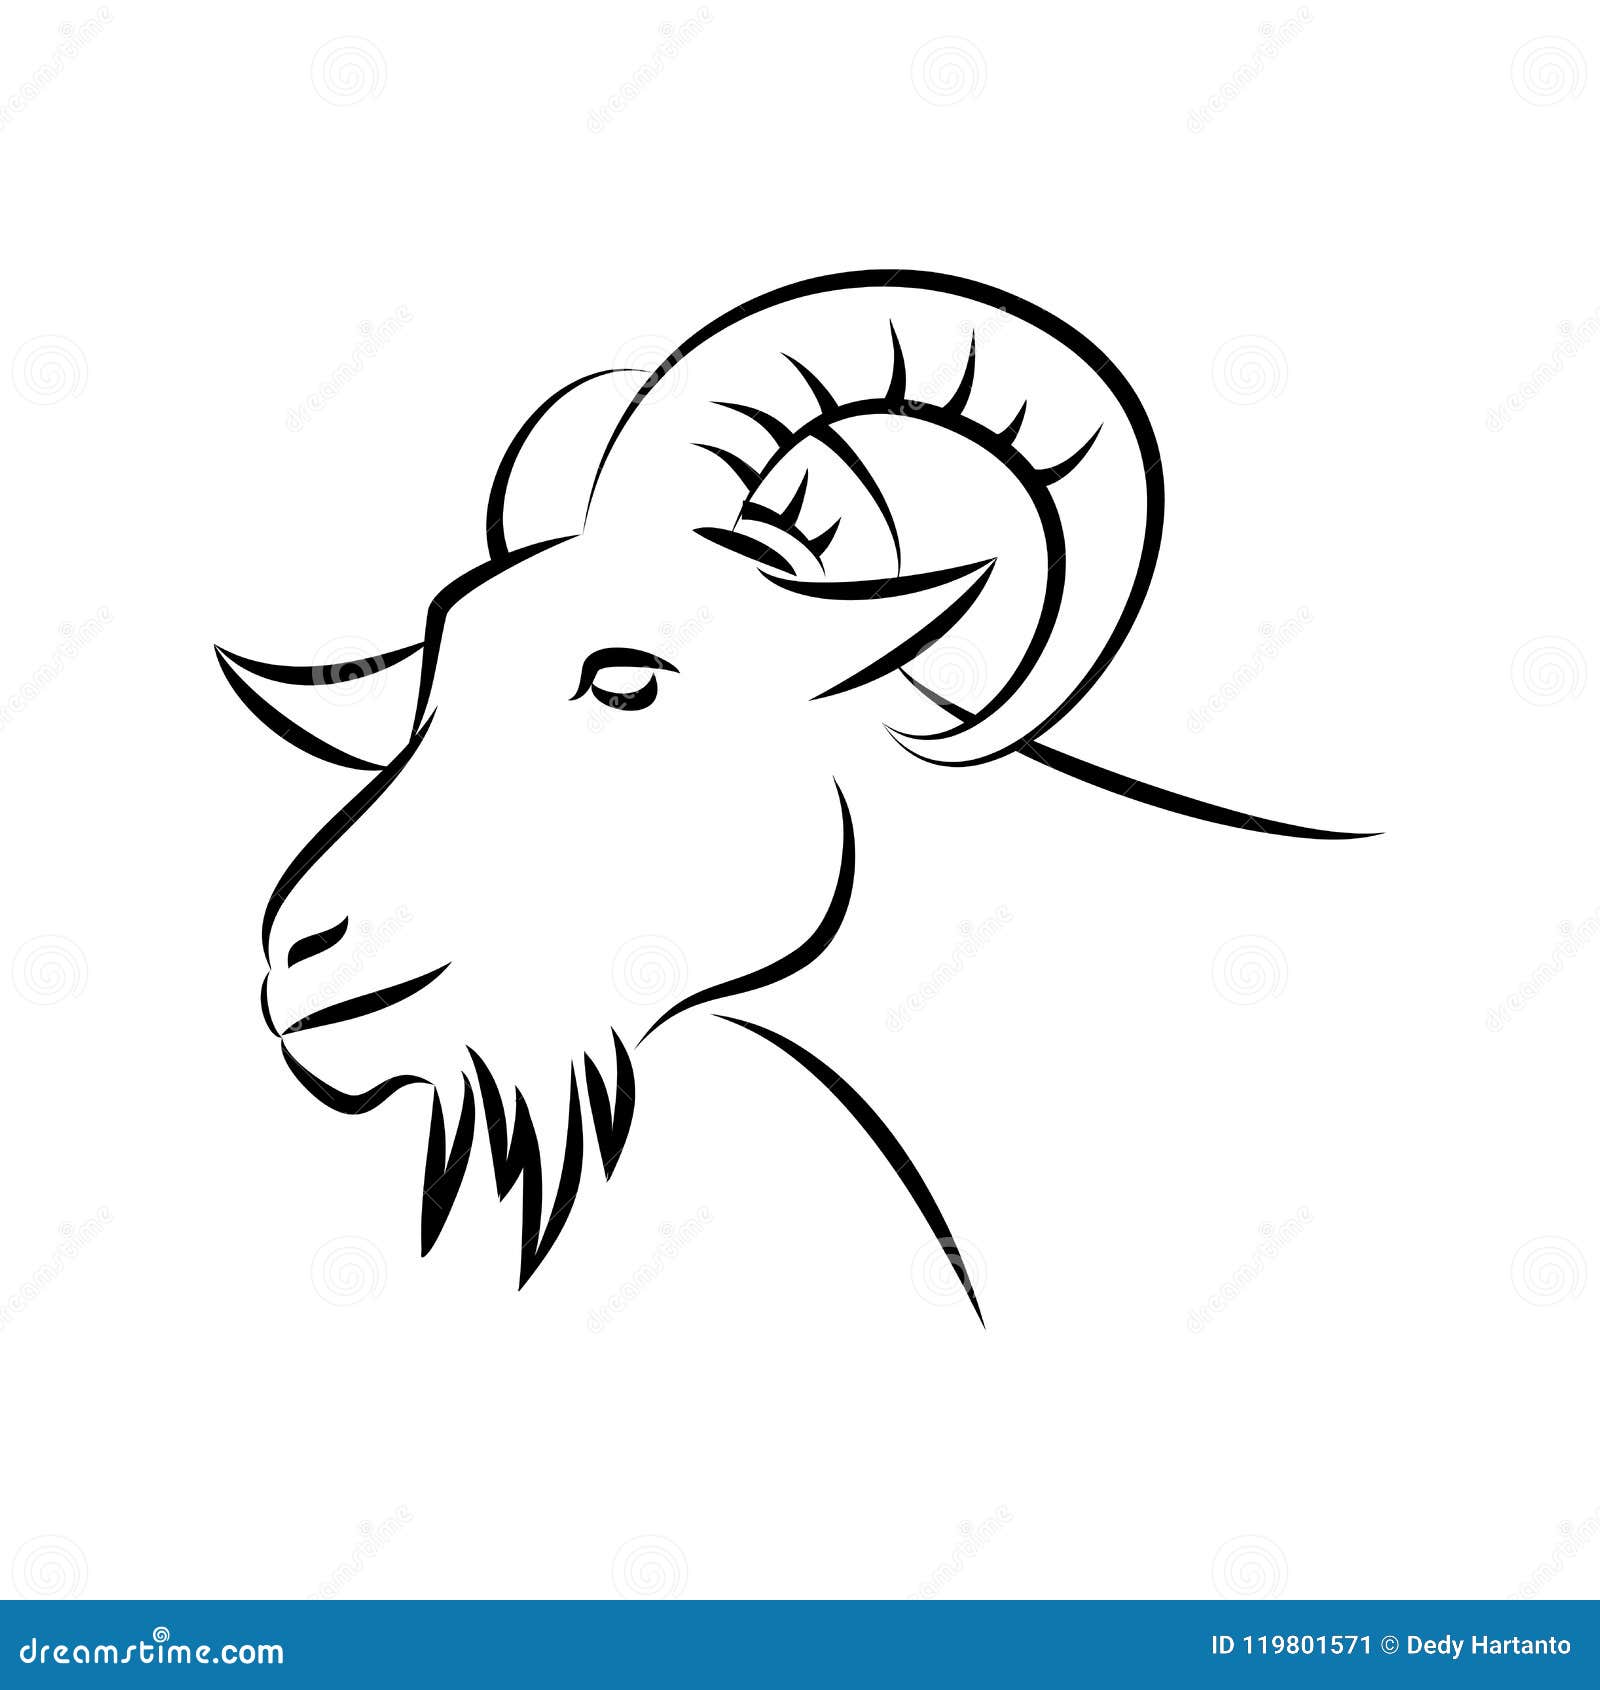 Goat head sketch stock vector. Illustration of graphic - 119801571